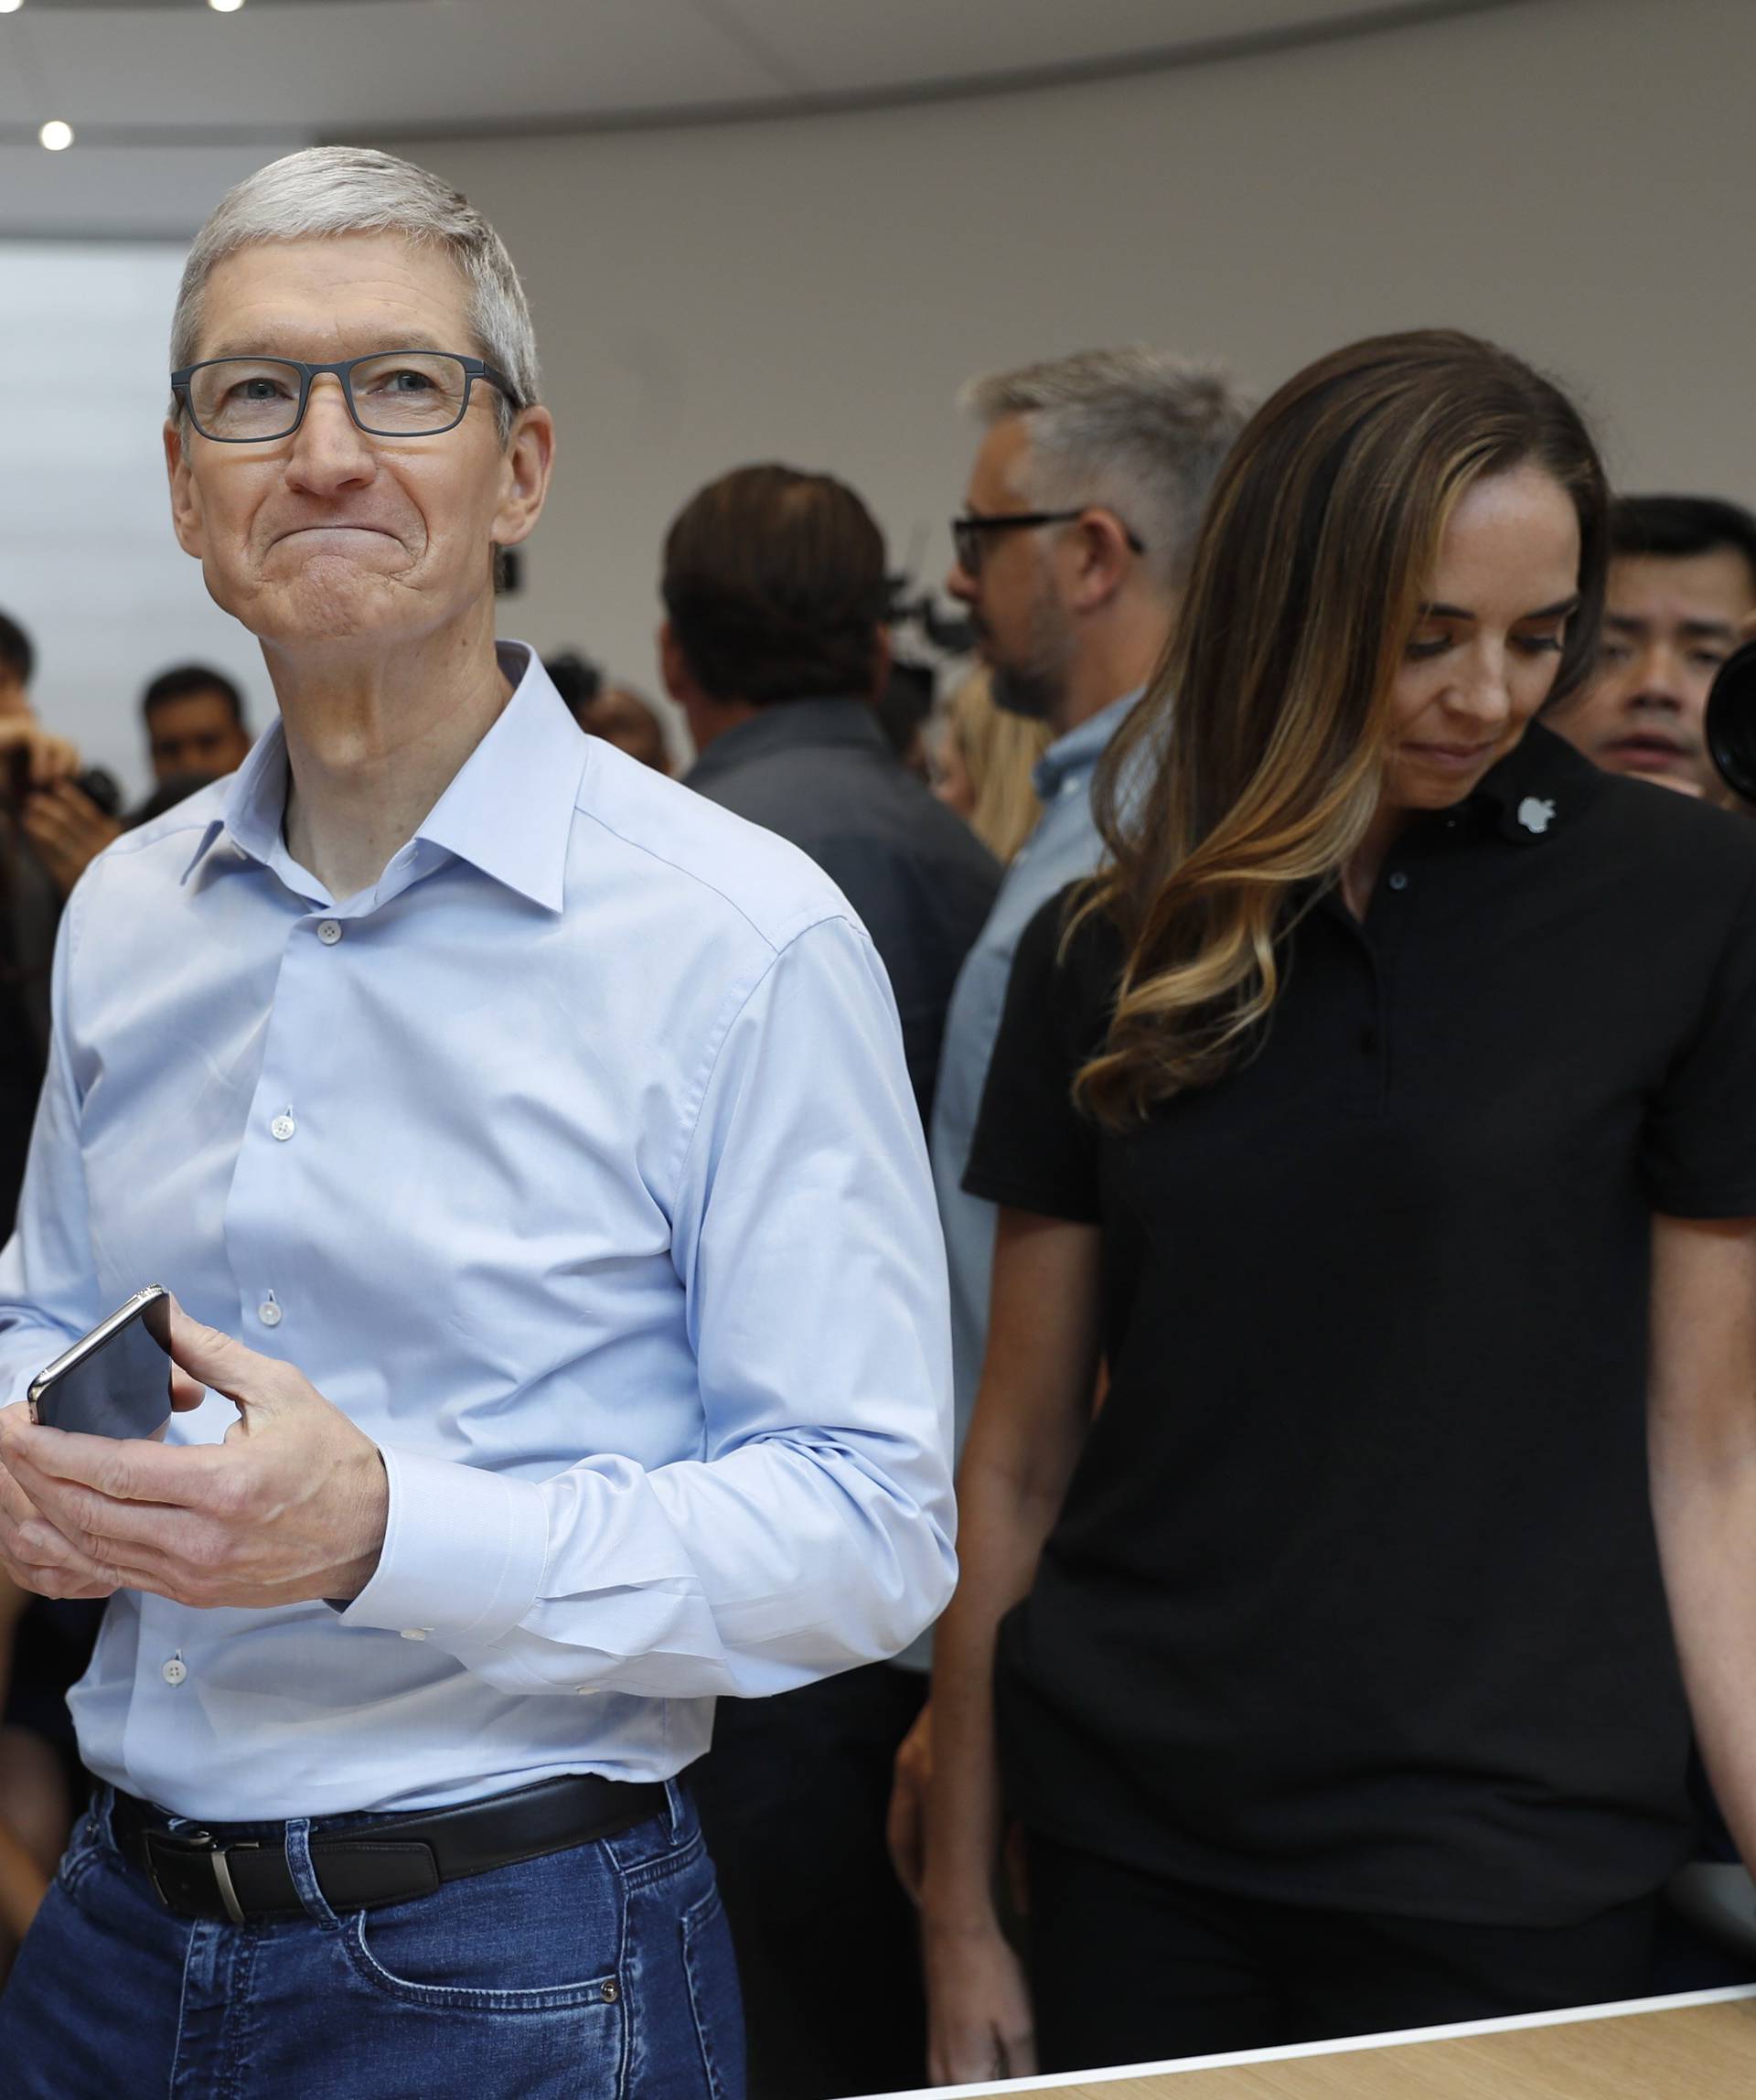 Apple's Tim Cook after product launch event in Cupertino